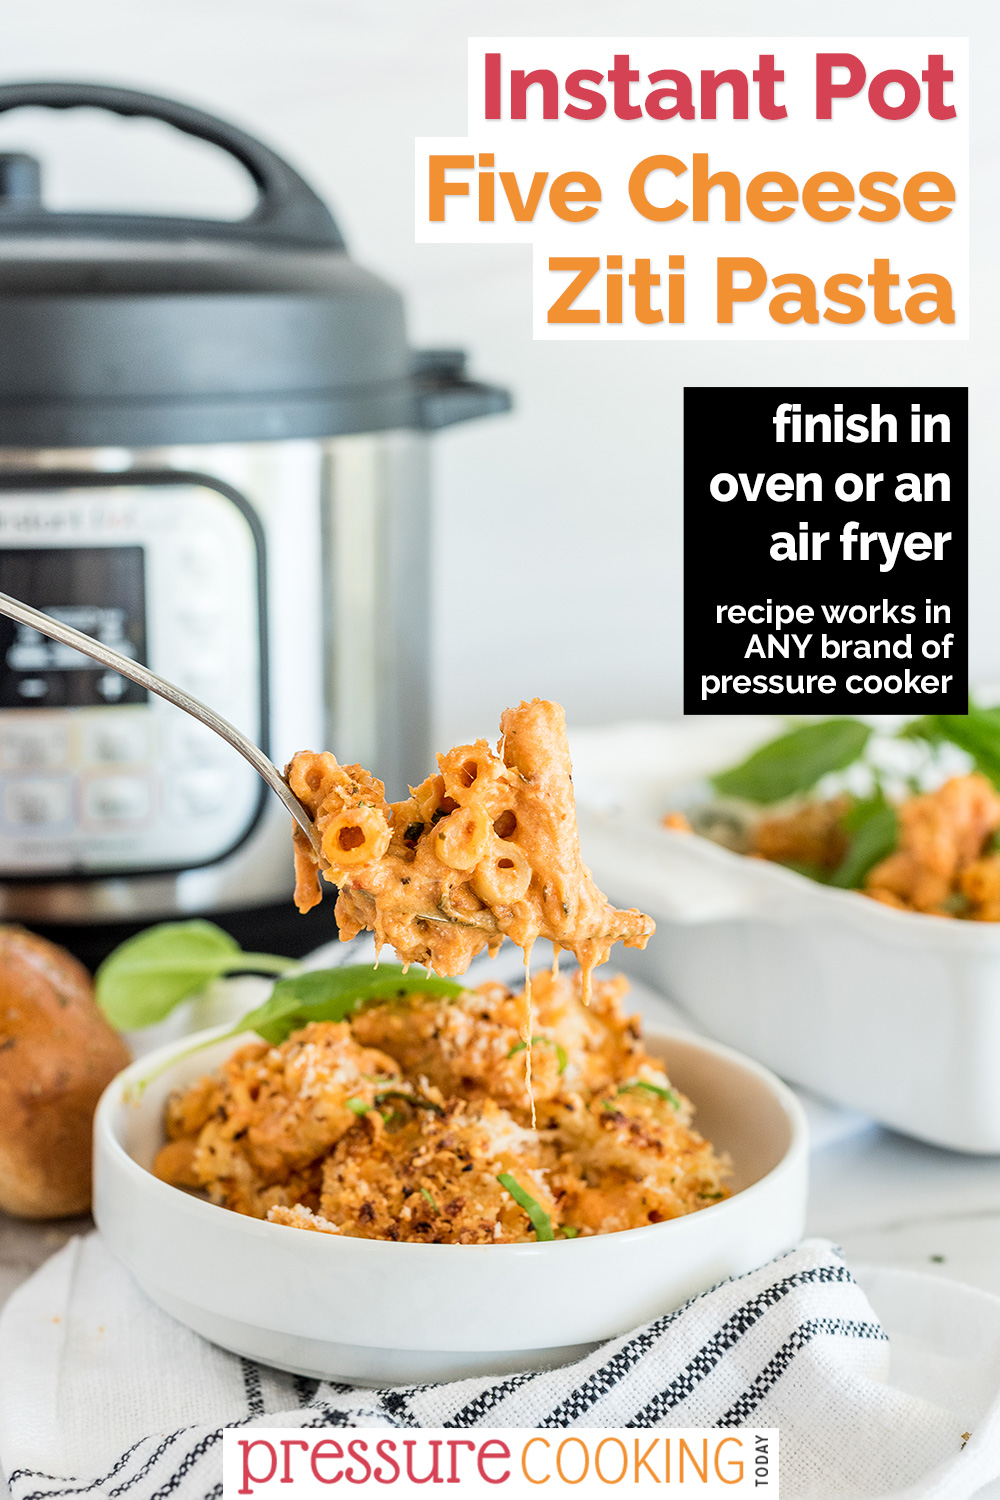 A pinterest pin promoting Instant Pot five cheese baked ziti, with instrutions to finish in the oven or air fryer. The image shows a spoonful of the ziti in front of an Instant Pot. via @PressureCook2da